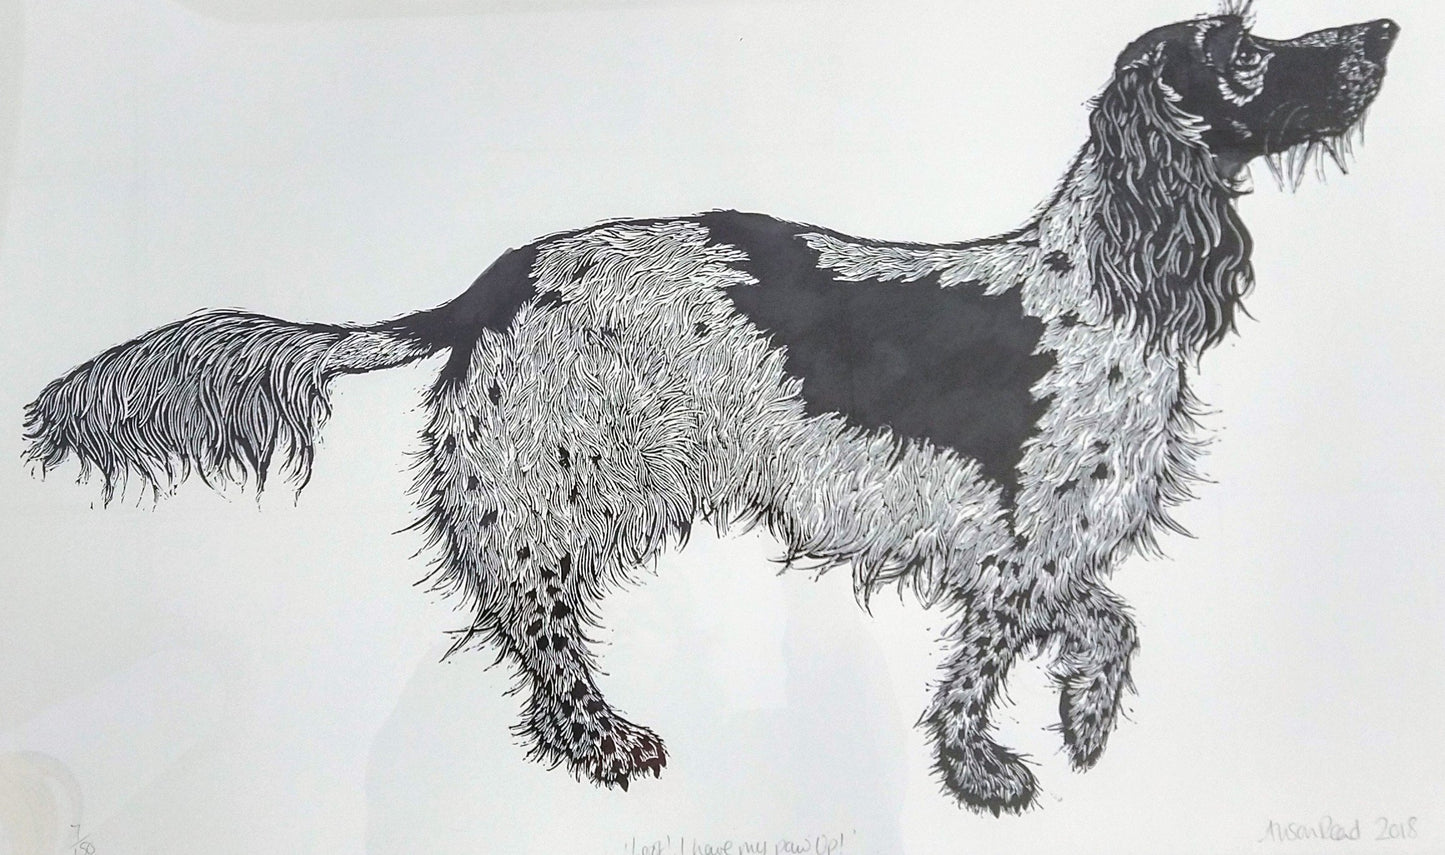 Alison Read- Original lino cut of a dog holding paw up-  "Look I Have My Paw Up"